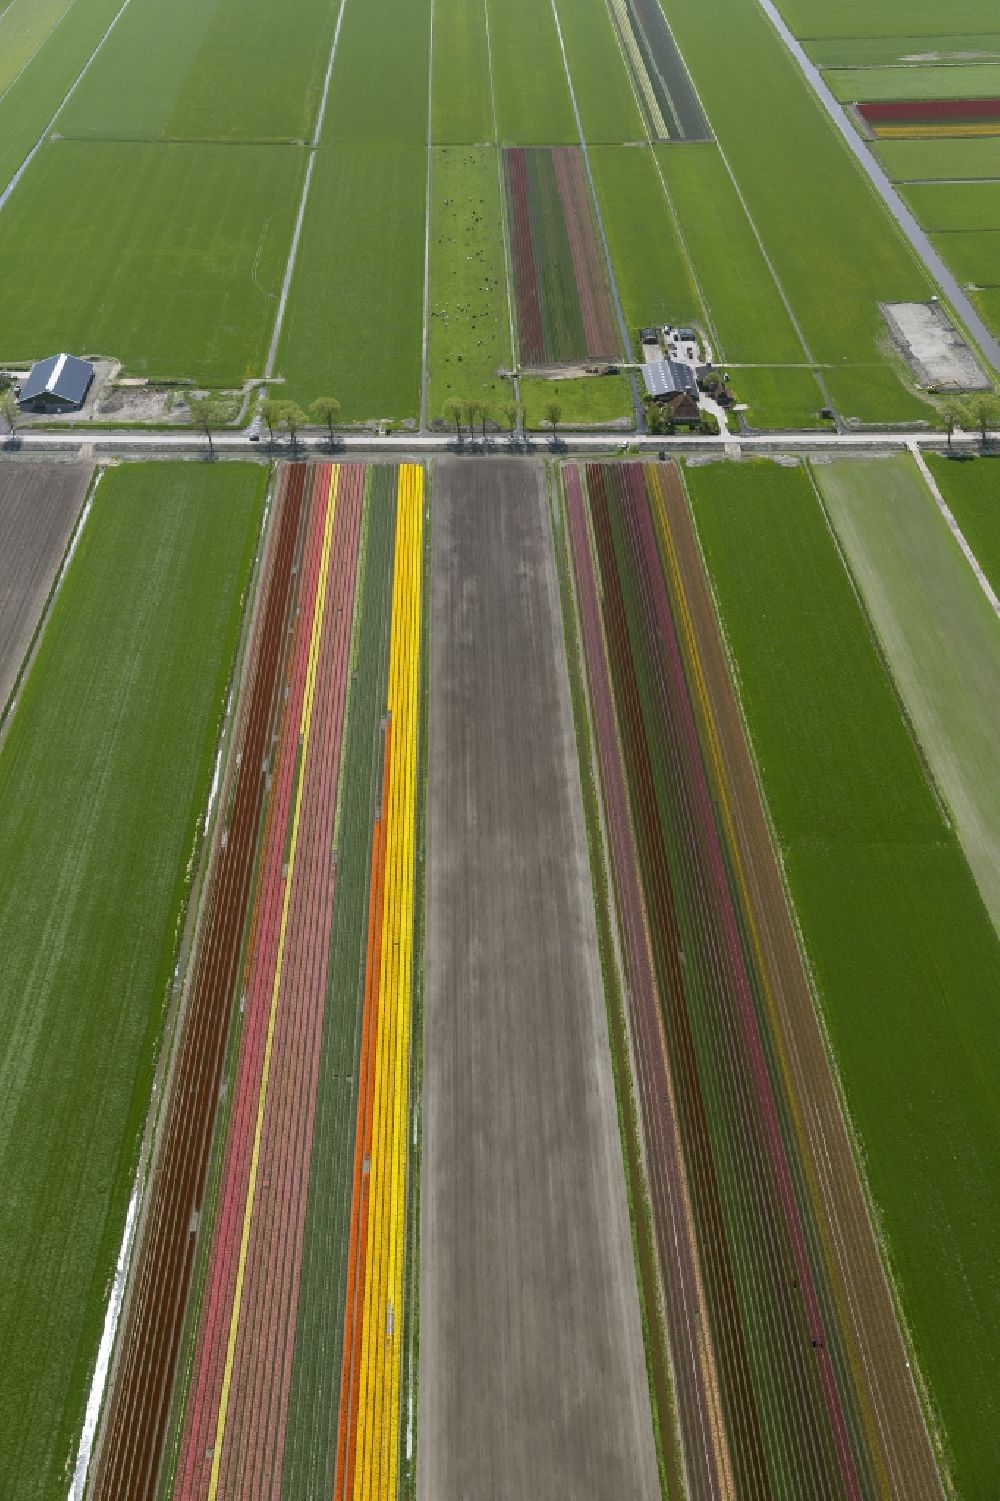 Aerial image Noordbeemster - Agriculture - Landscape with fields of tulips to flower production in Noordbeemster in North Holland Holland / Netherlands